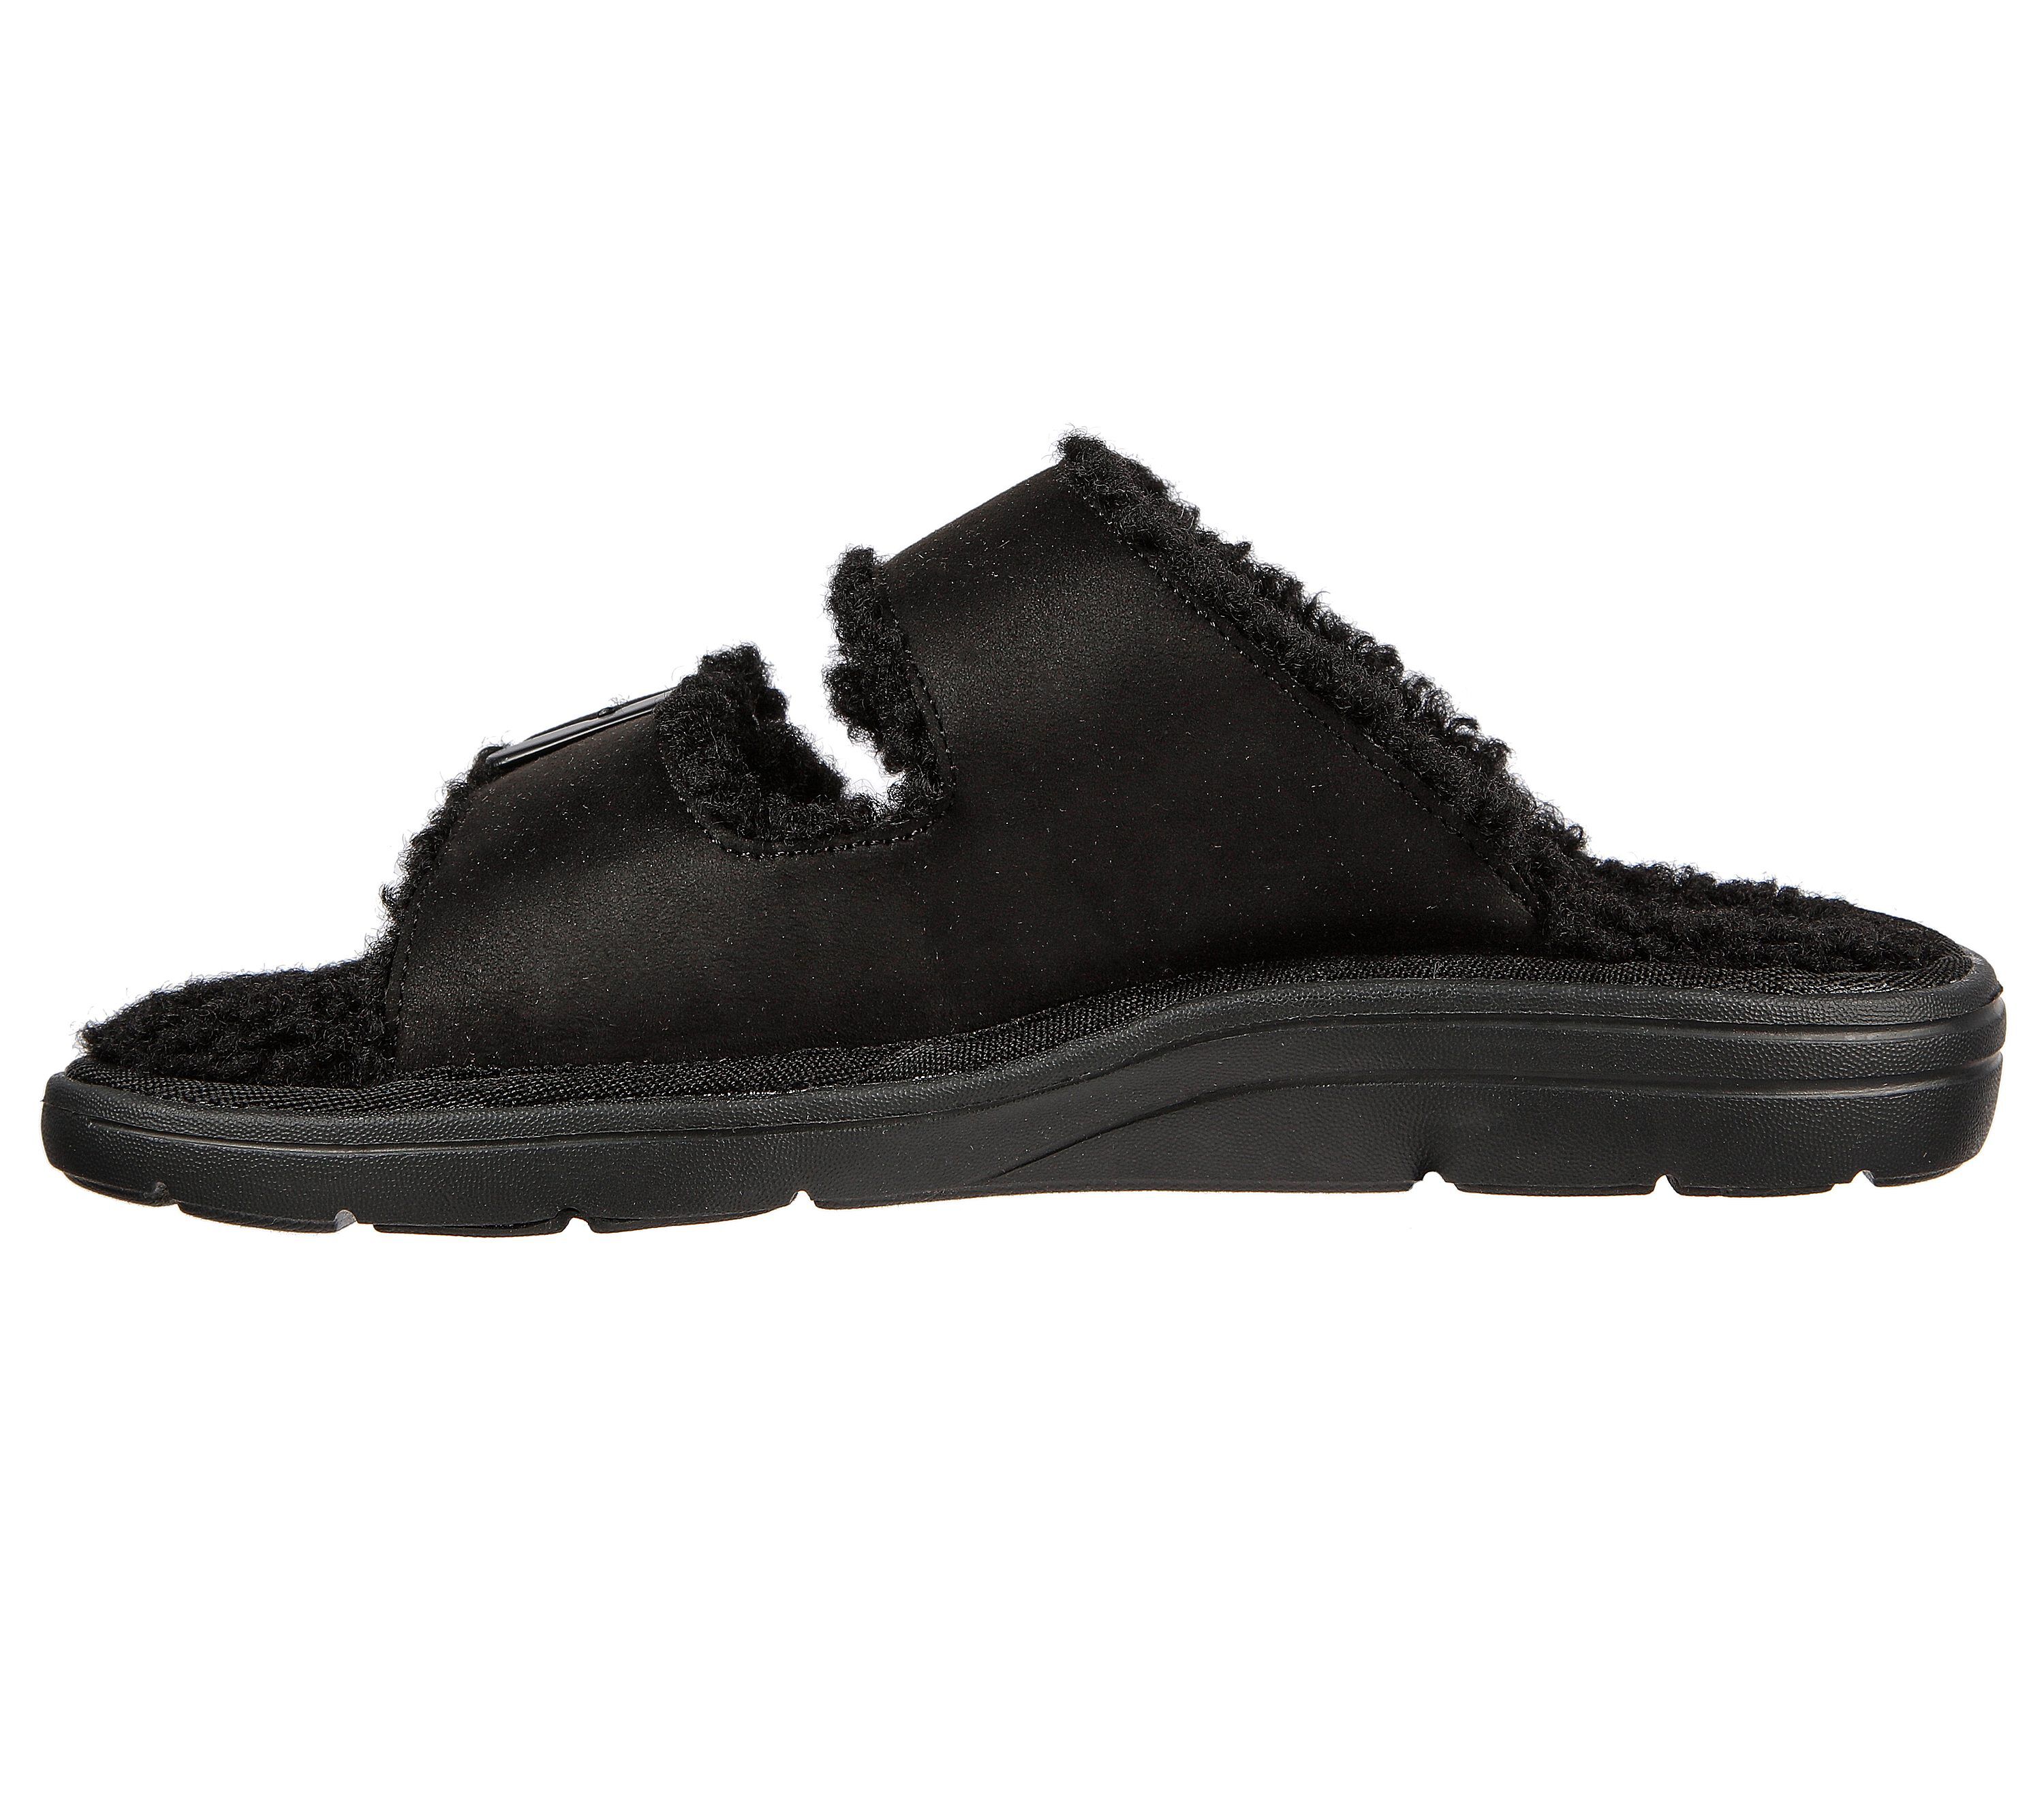 Shop the Skechers GO Lounge: Arch Fit Lounge - Adorable | SKECHERS CA